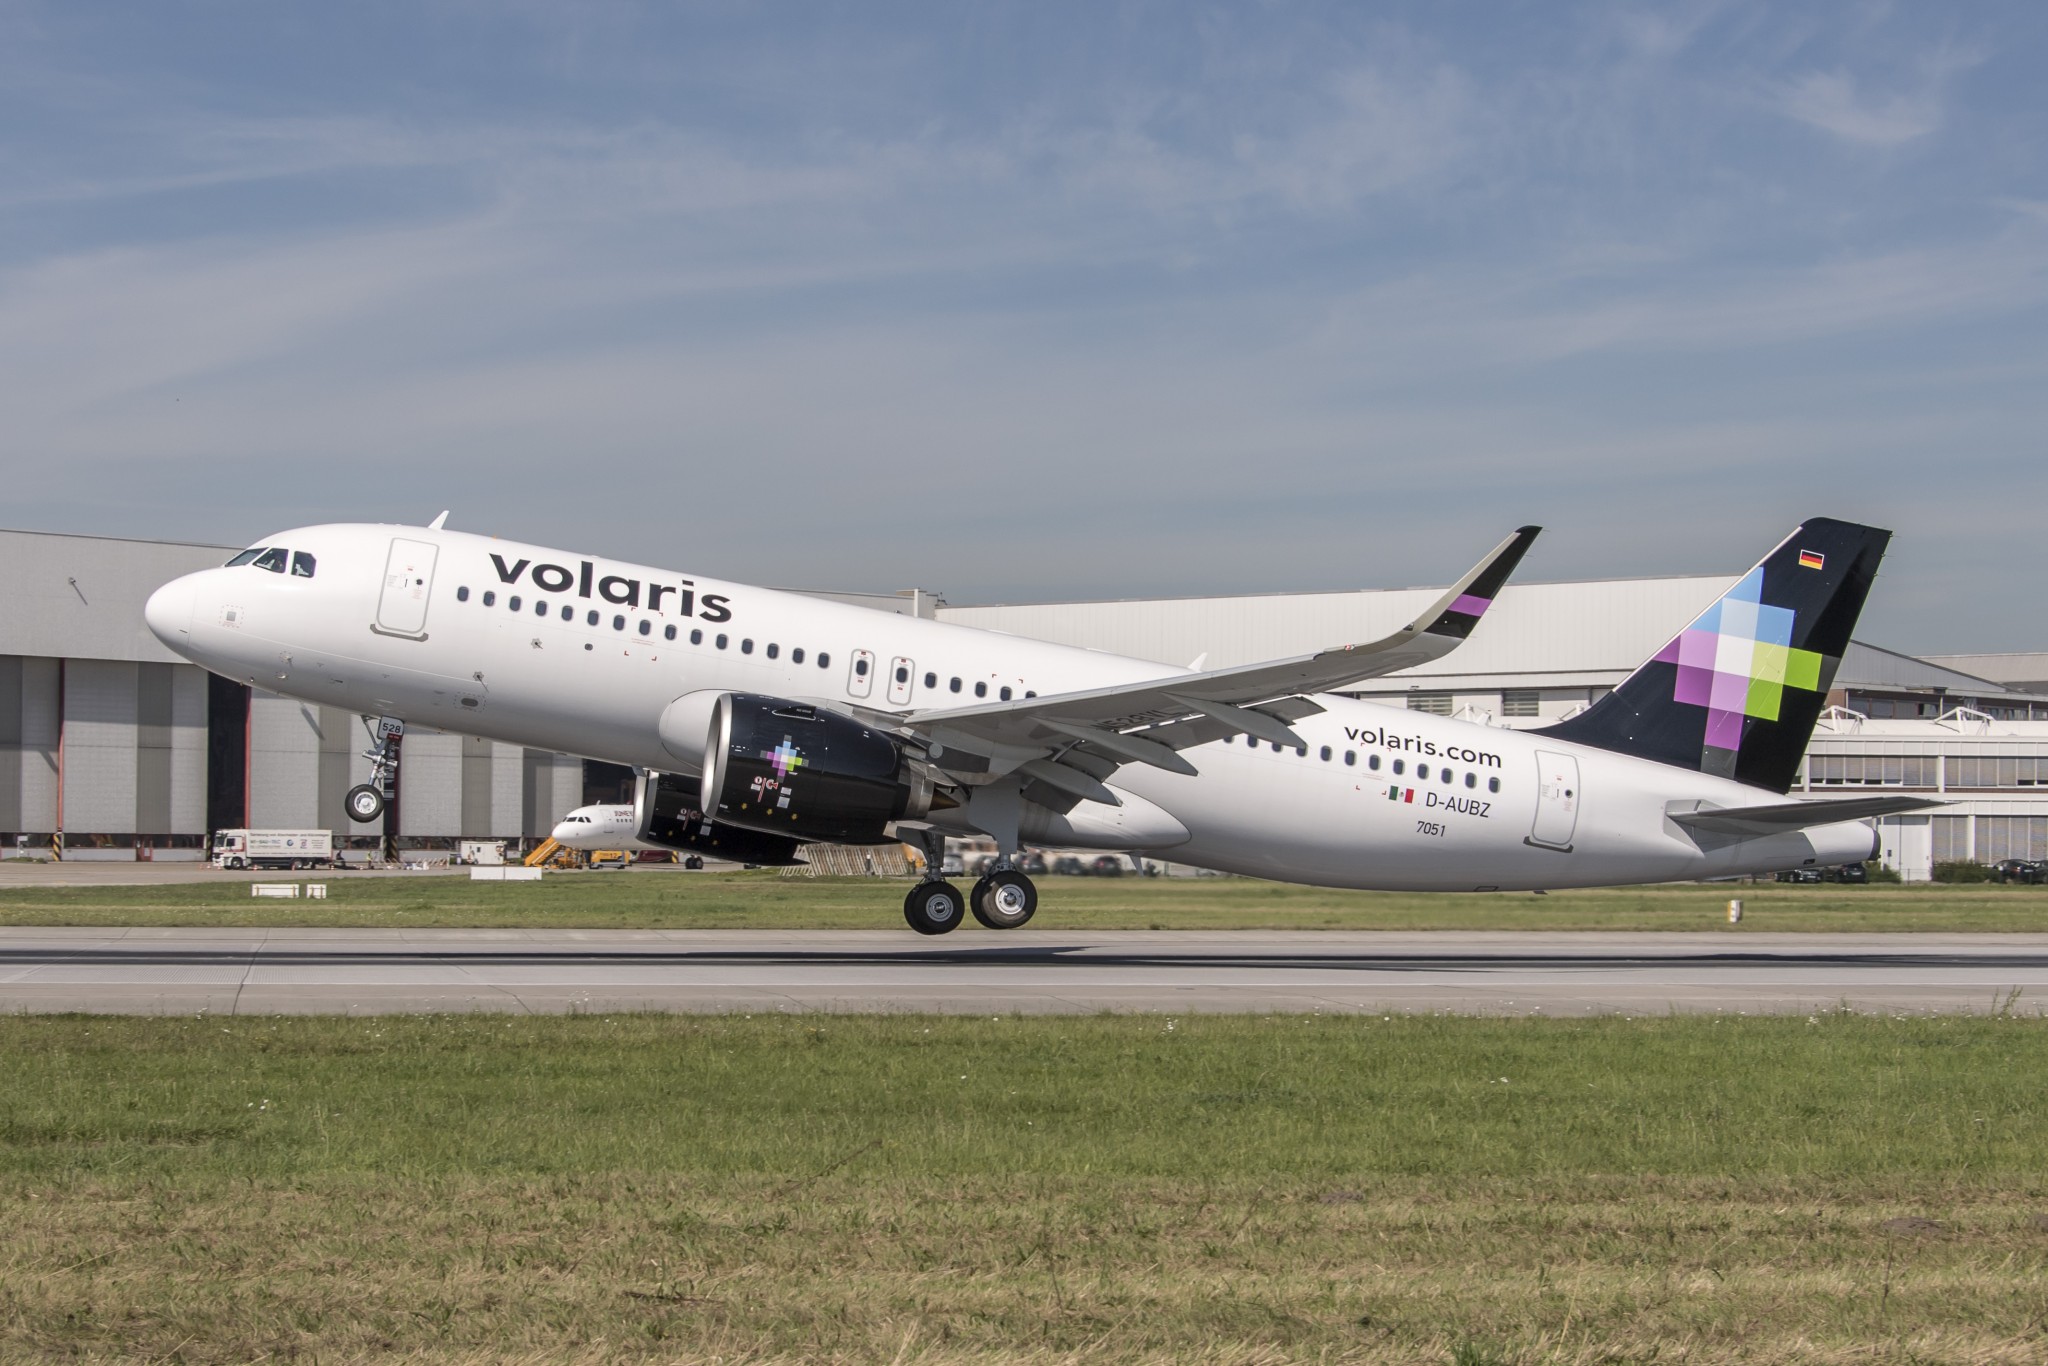 Volaris reports passenger traffic up over 20% y/y